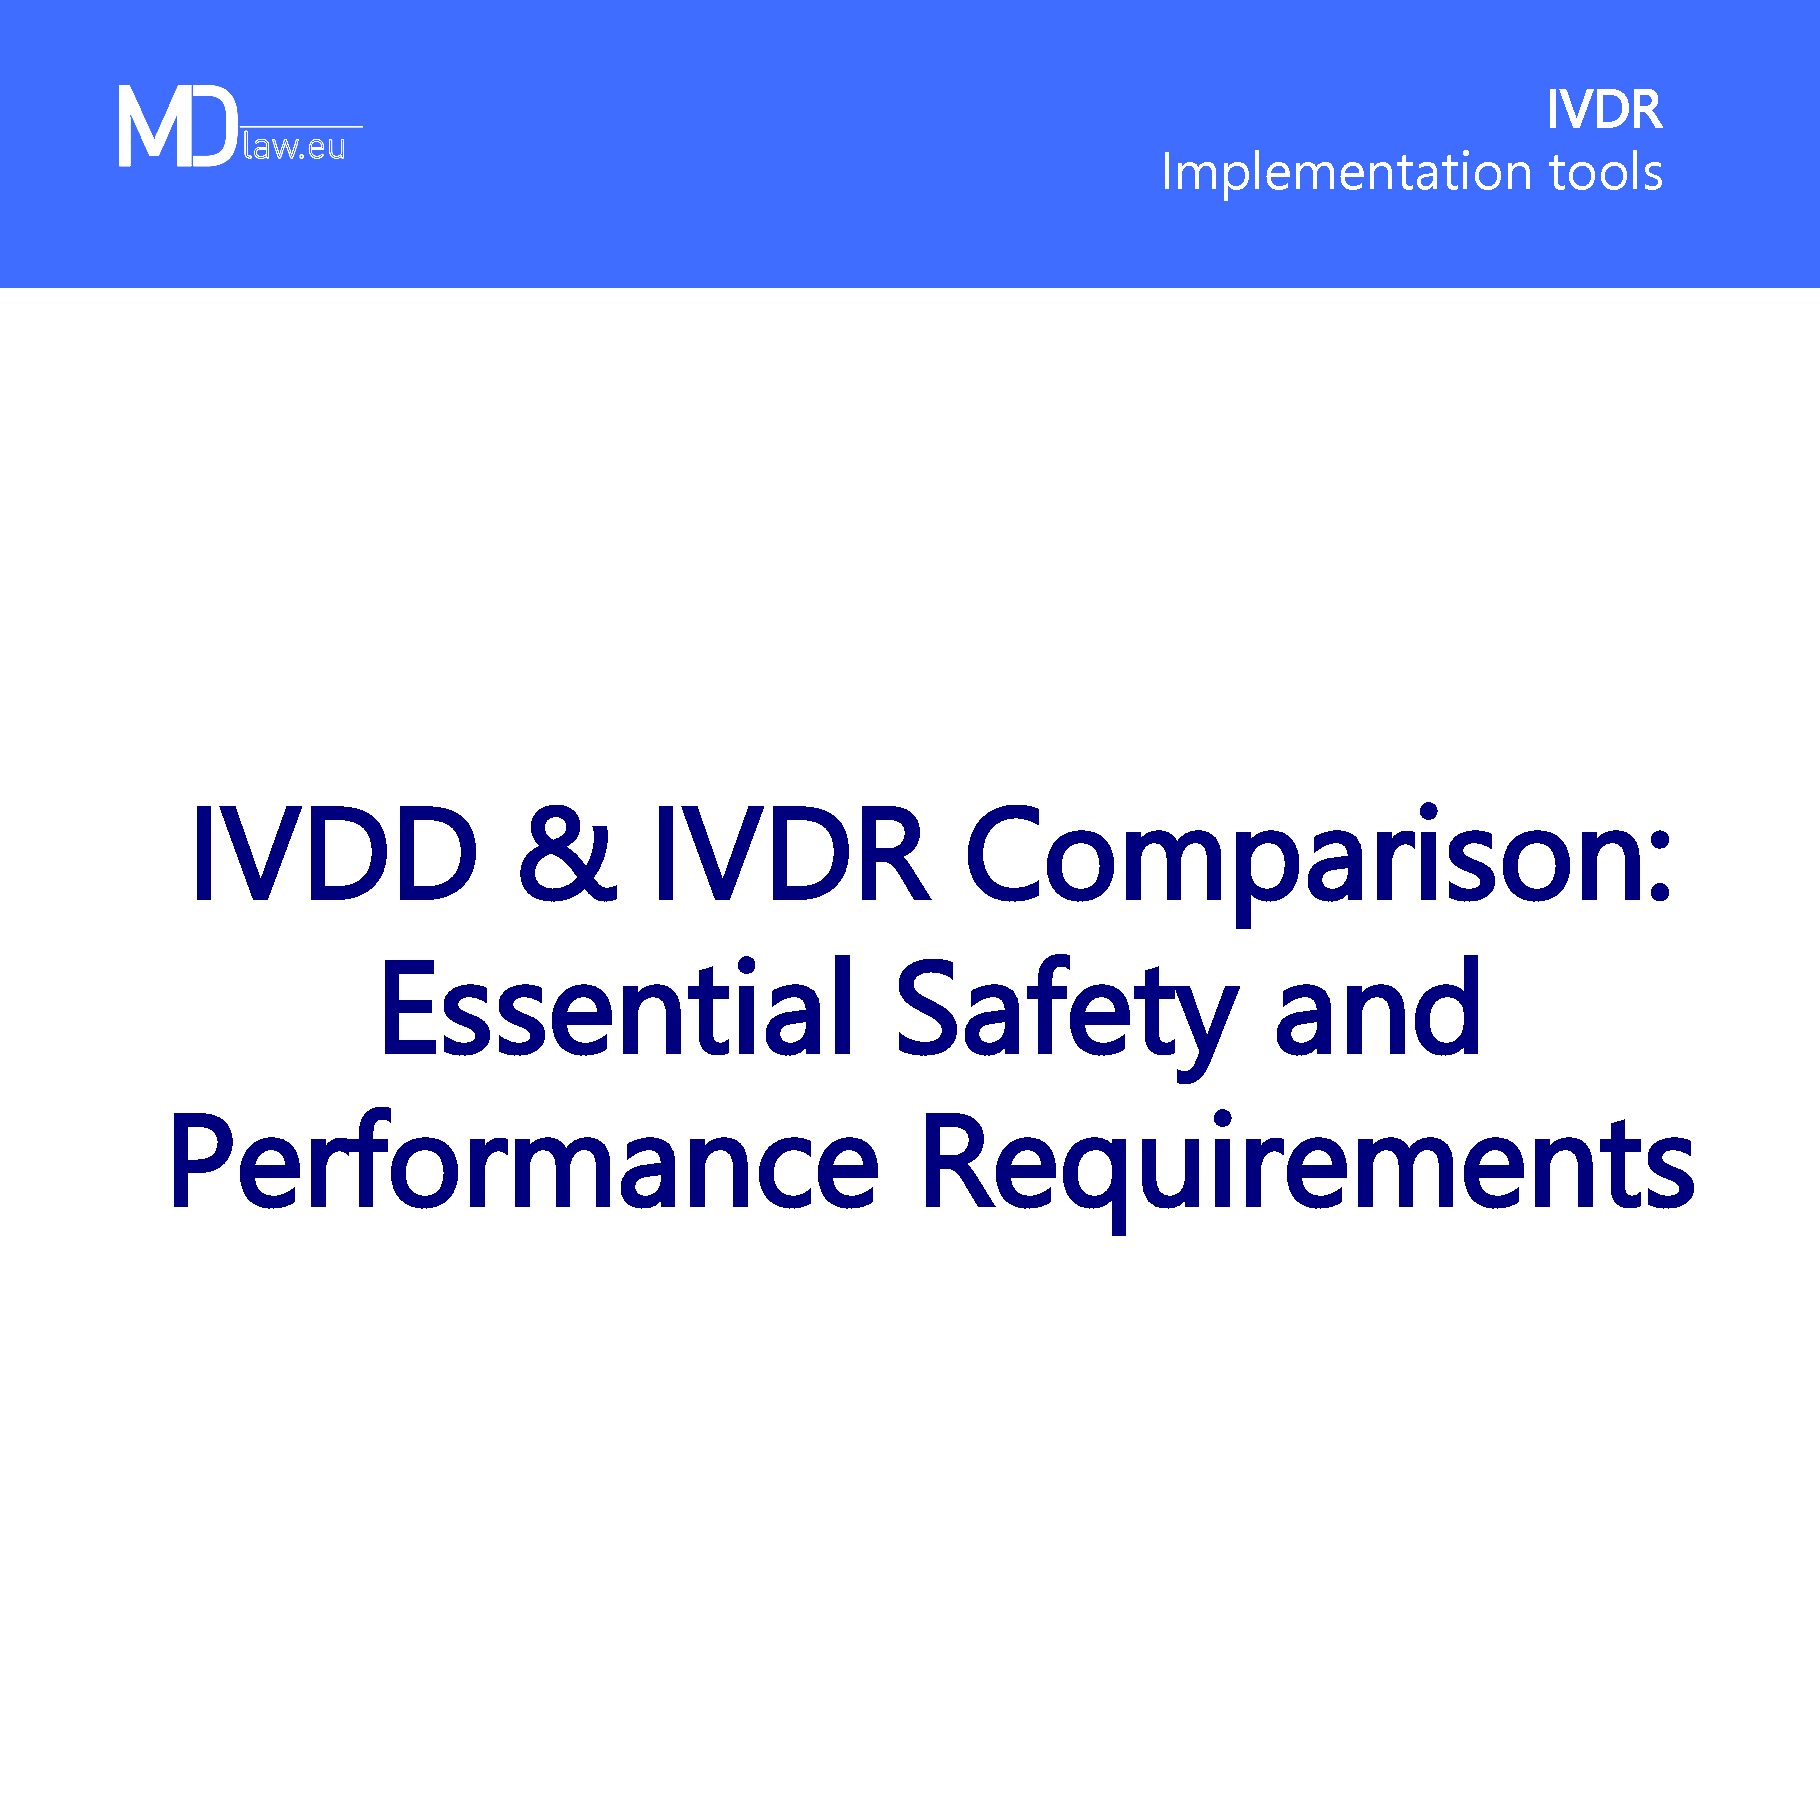 Ivdd Ivdr Comparison Essential Safety And Performance Requirements Mdlaw Information Platform On European Medical Device Regulations